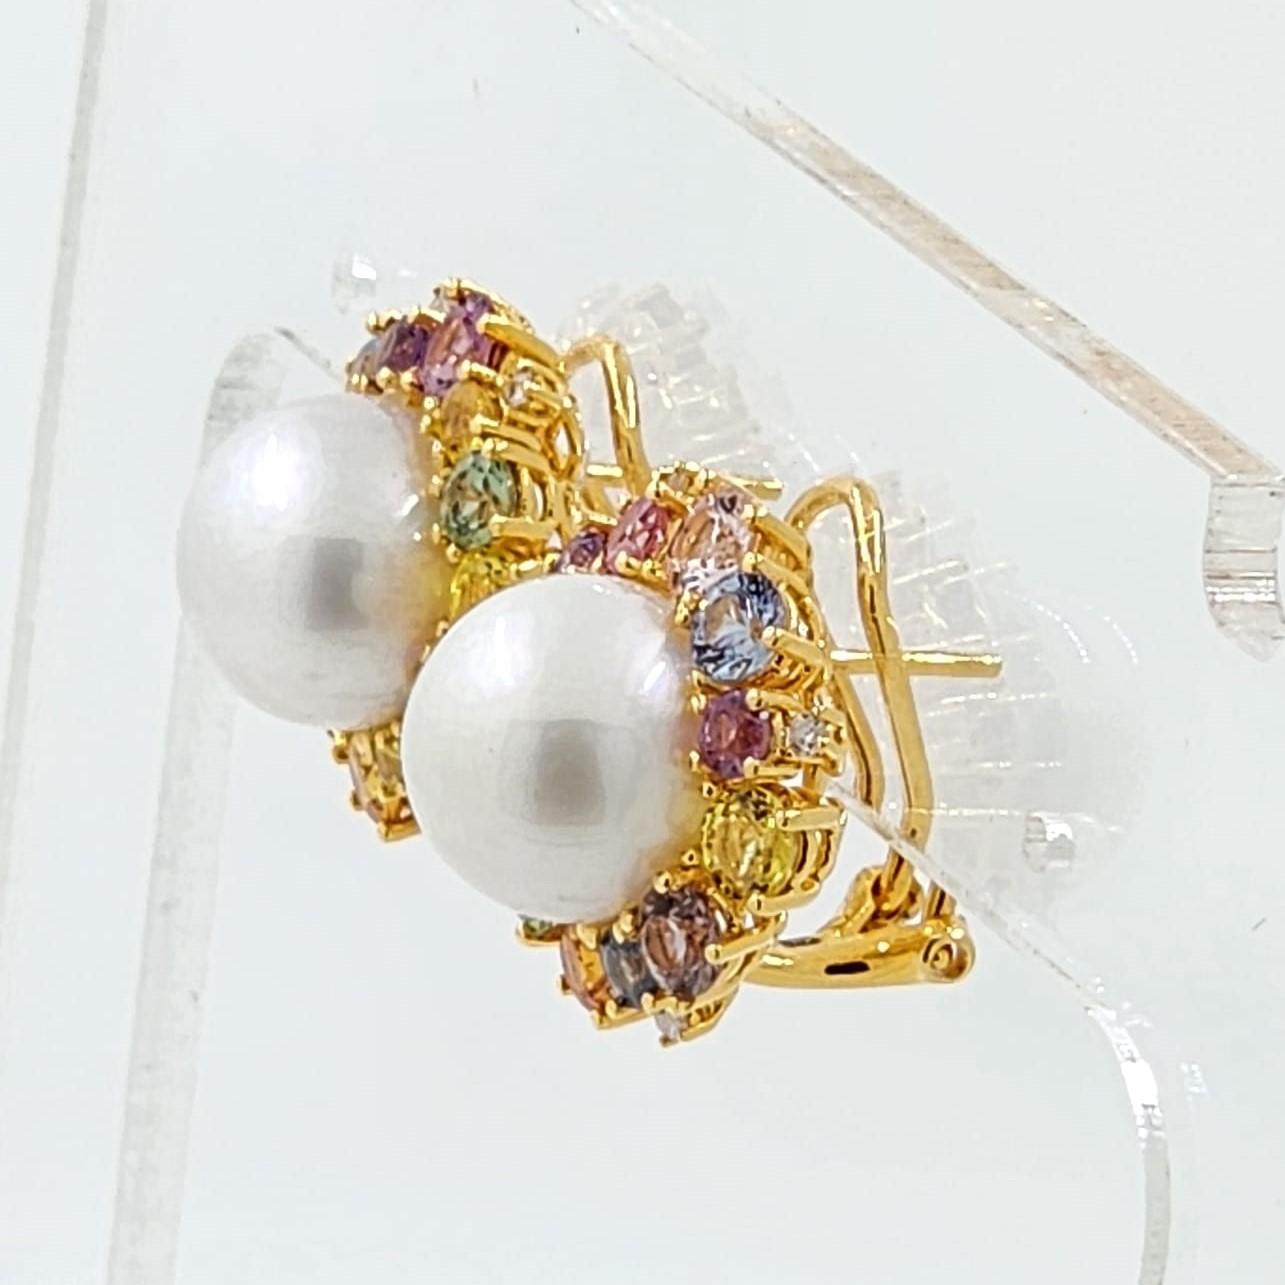 Contemporary 11Mm South Sea Pearl and Sapphire Earrings in 18K Gold Vermeil Sterling Silver For Sale